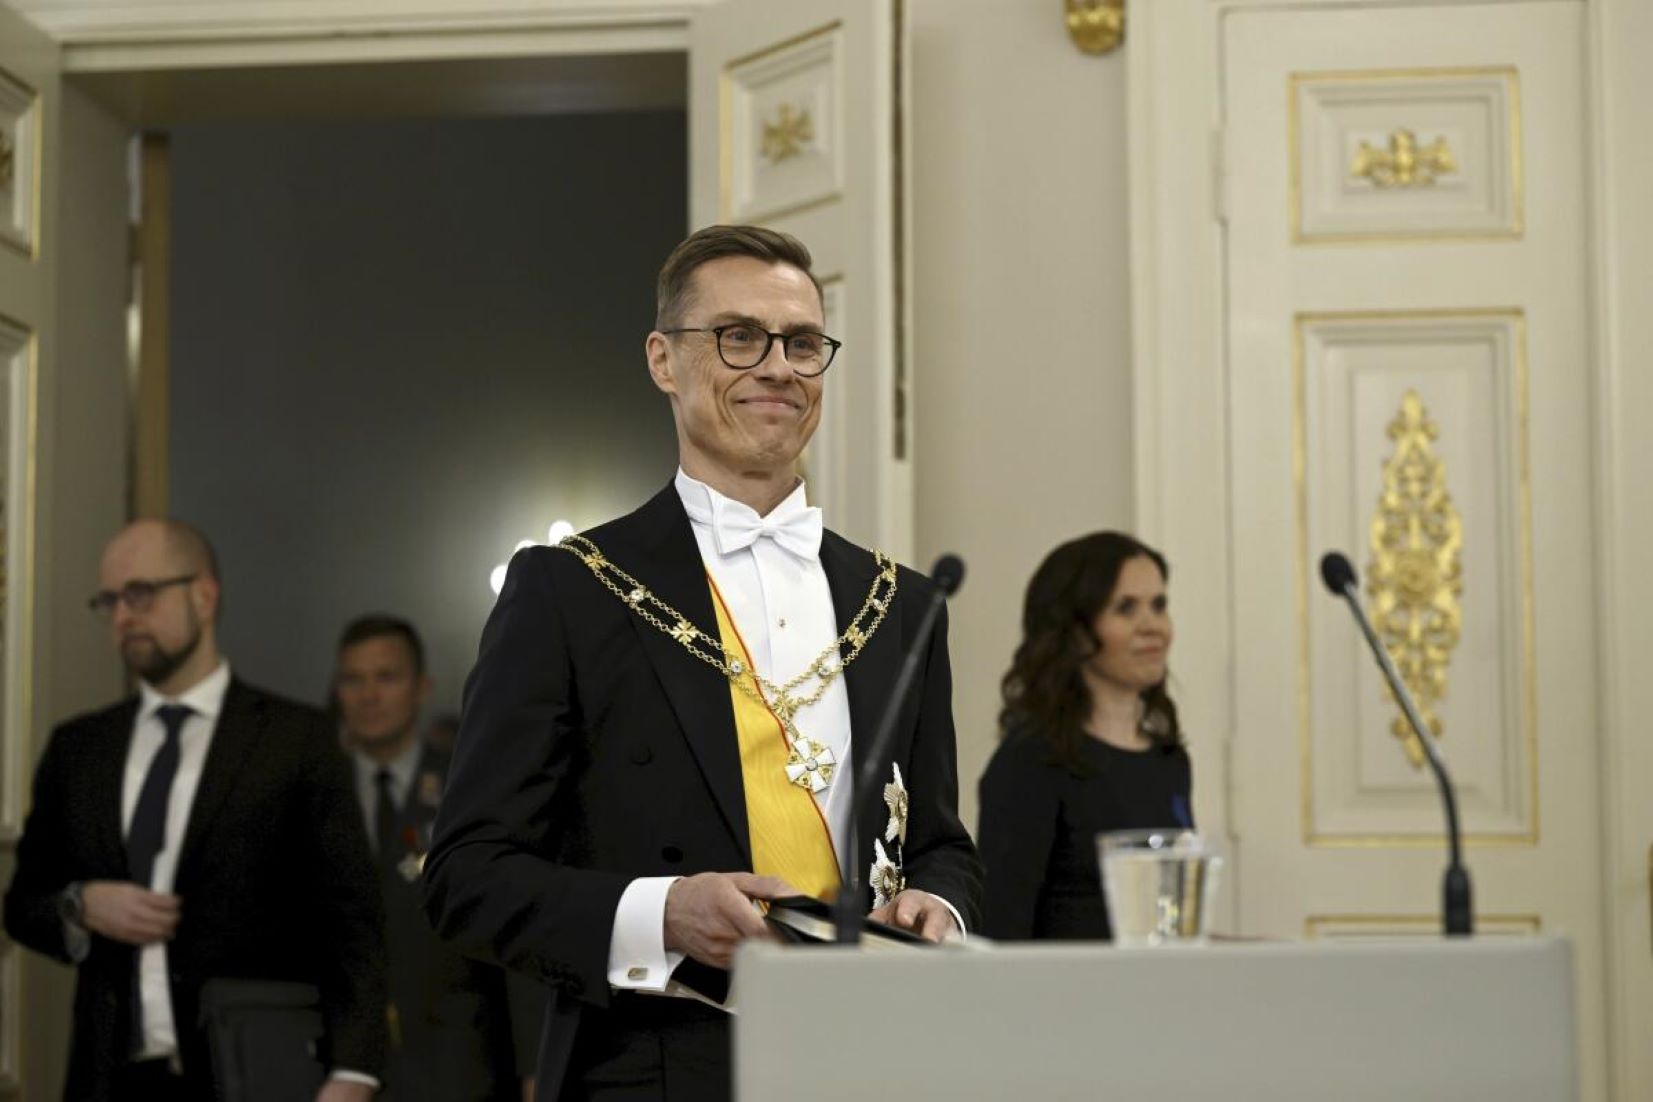 Finland’s New President Stubb Takes Office